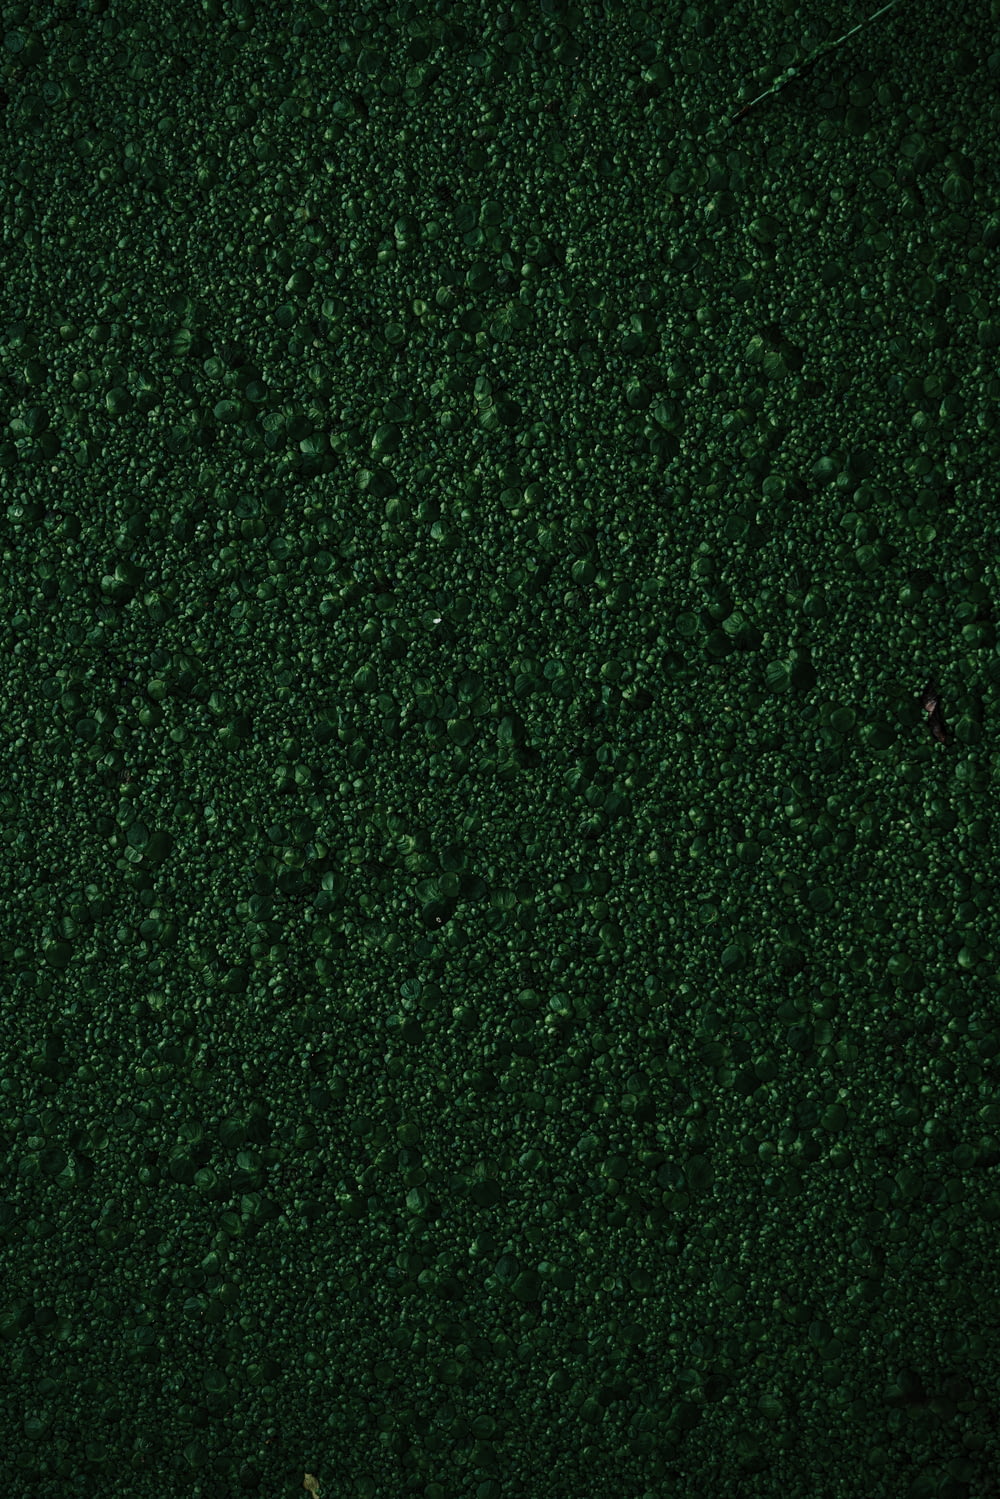 a close up of a green surface with drops of water